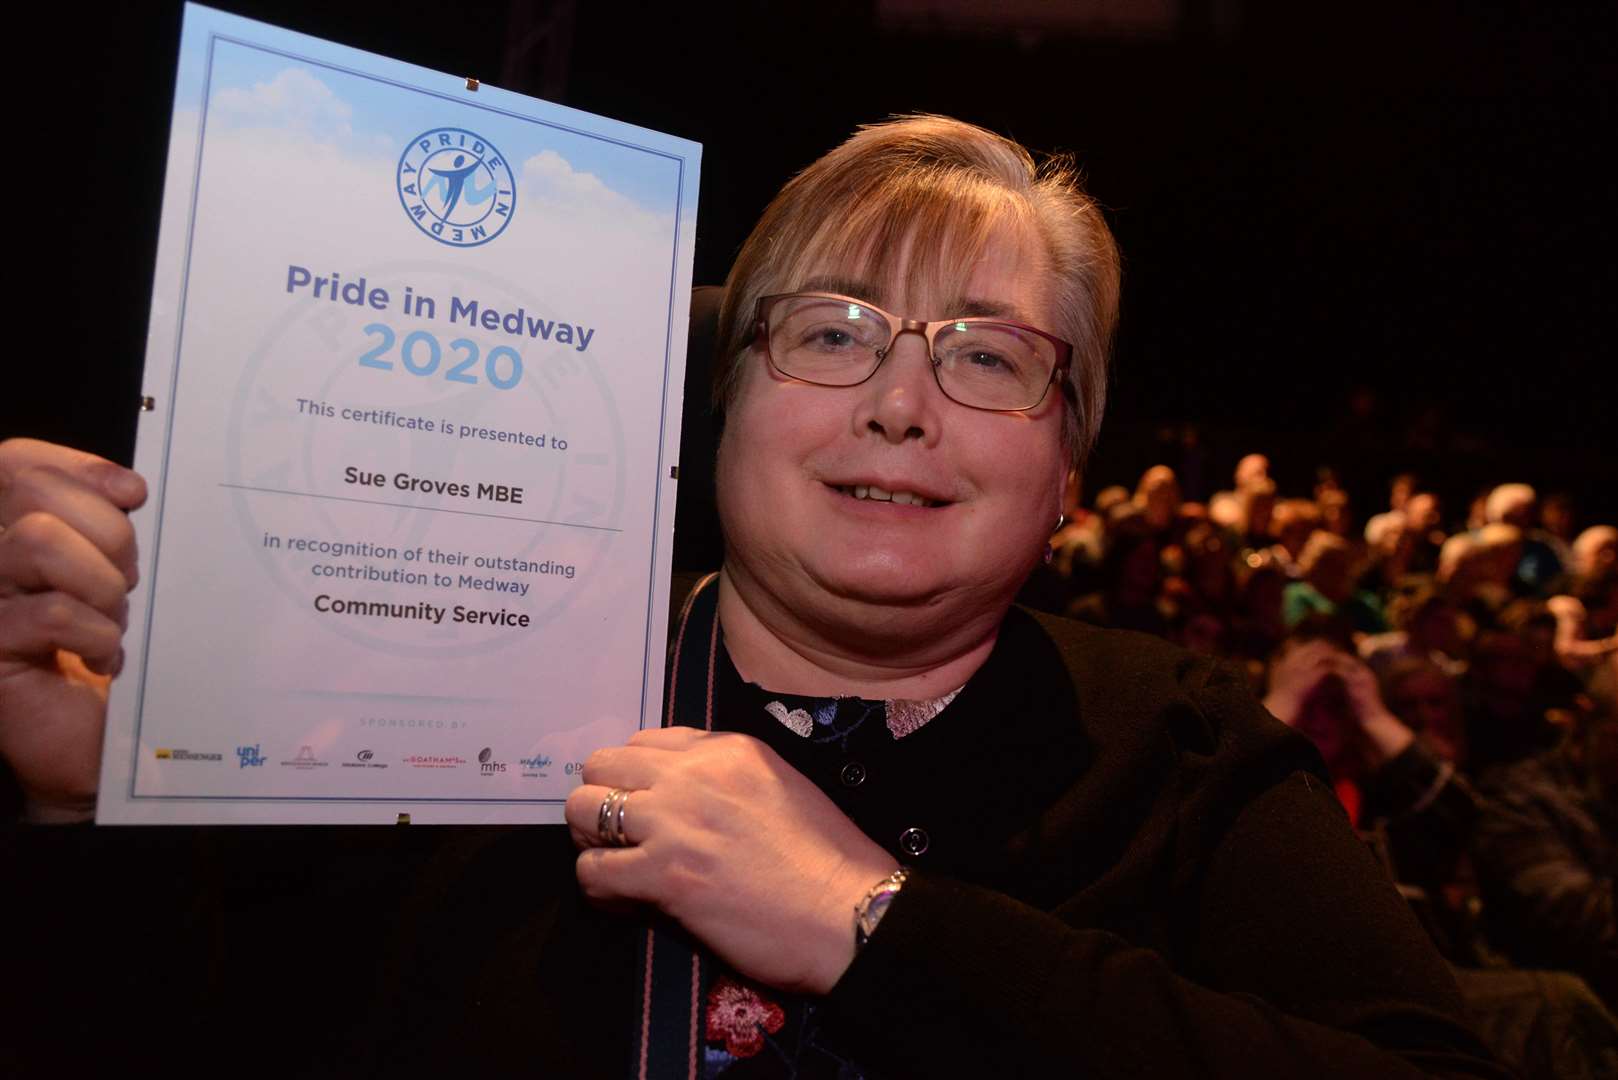 Sue Groves MBE with her community service certificate at the Pride in Medway awards